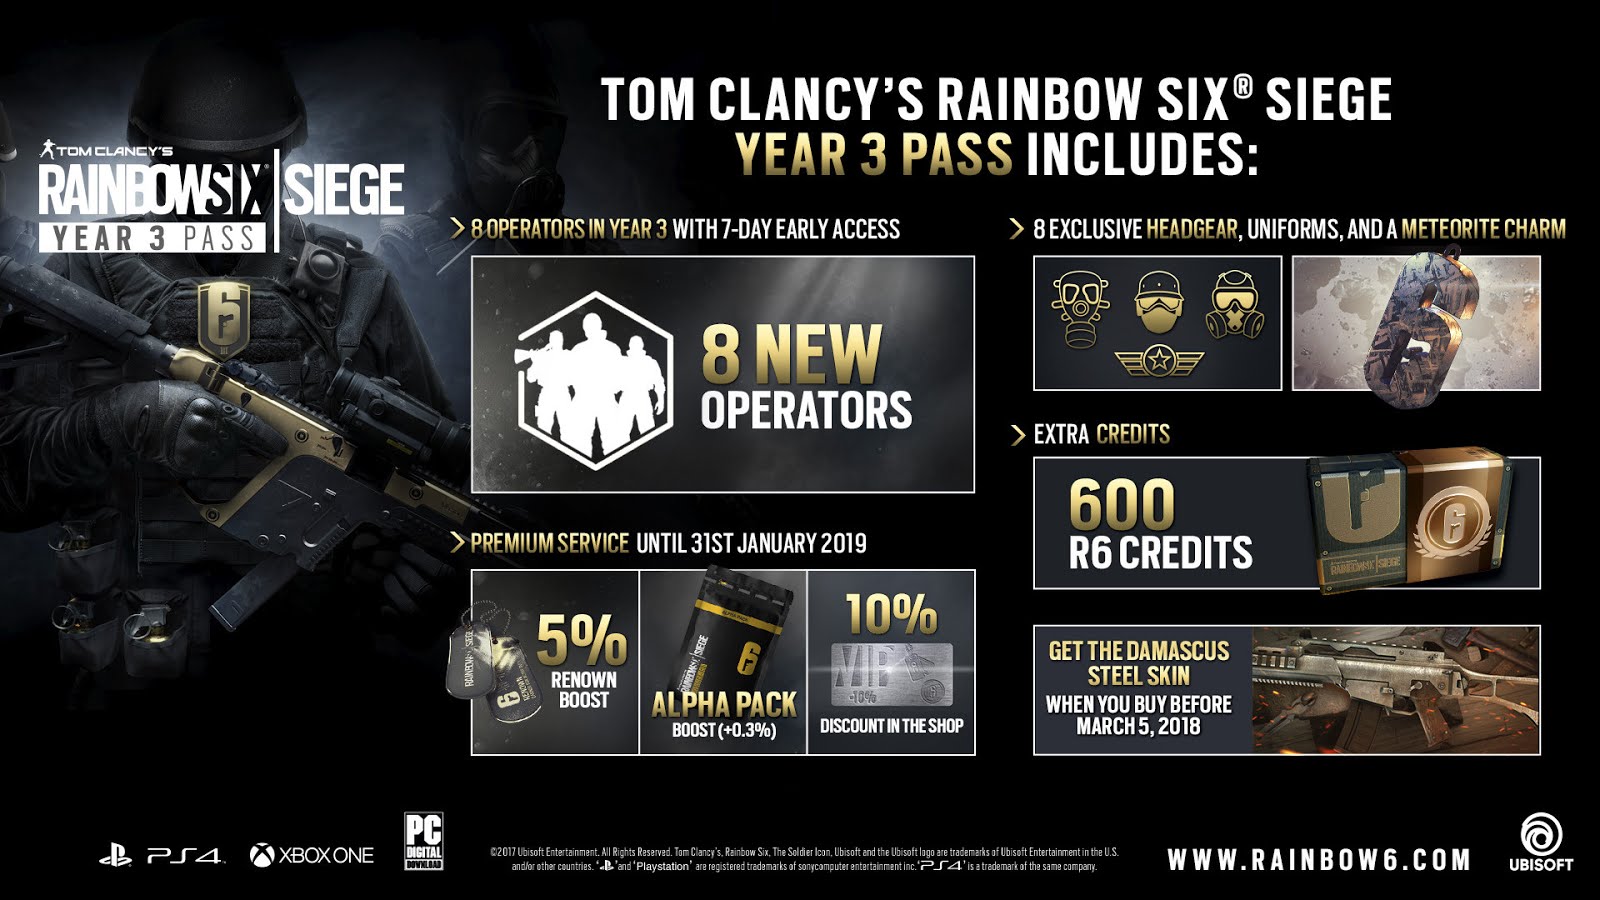 bad underkjole retfærdig Ubisoft® Announces The Line Up Of Editions For Year 3 Of Tom Clancy's  Rainbow Six® Siege - The Tech Revolutionist